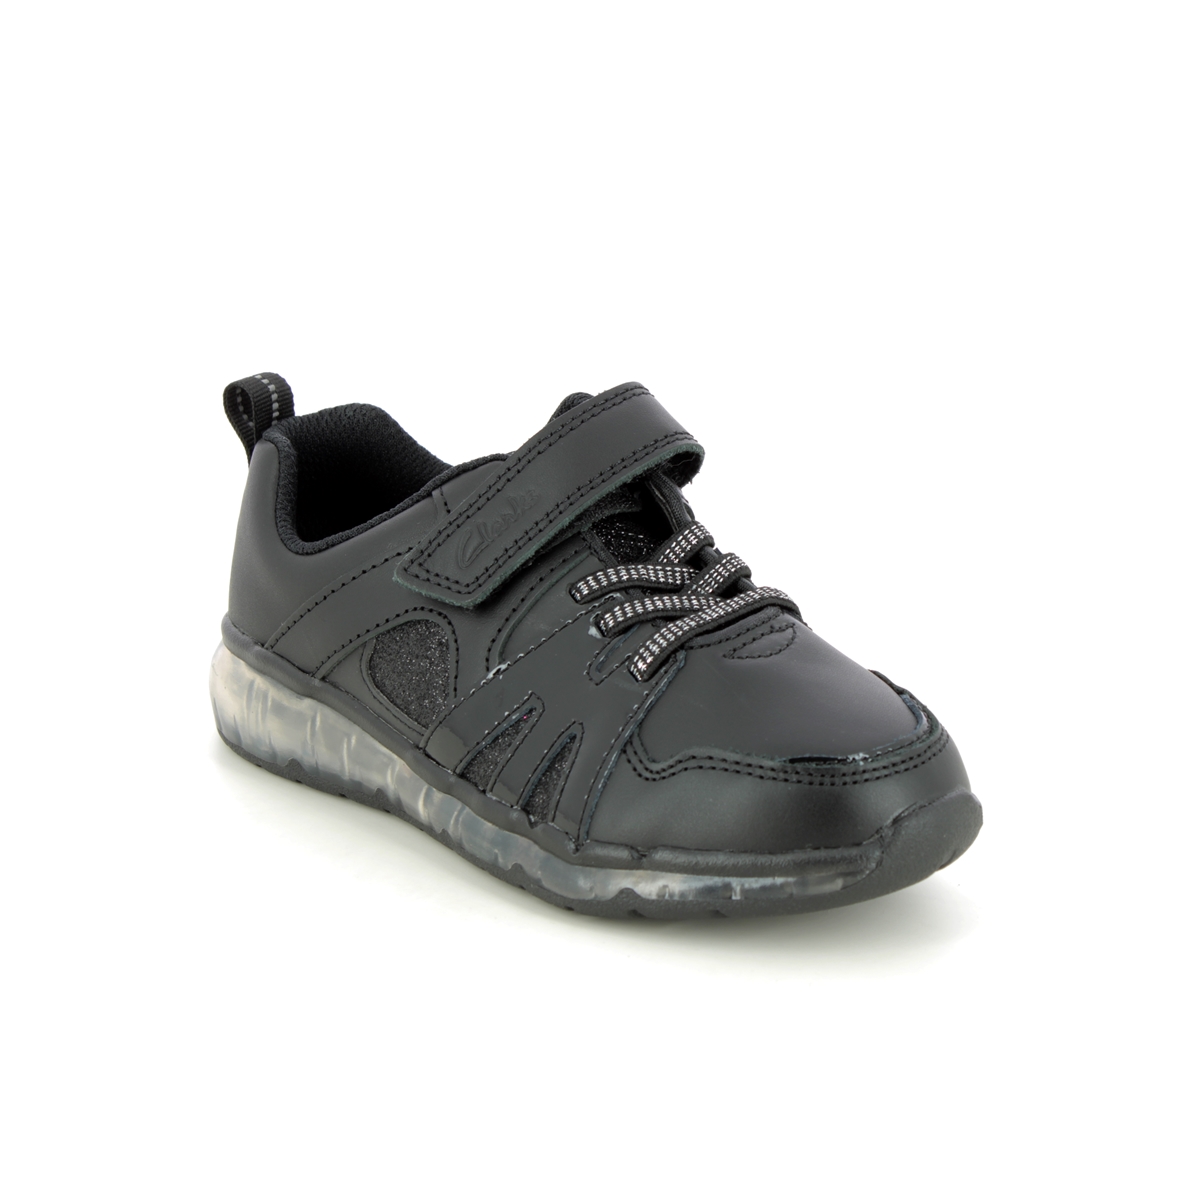 Clarks Spark Glow K Black Leather Kids Girls School Shoes 686657G In Size 11.5 In Plain Black Leather G Width Fitting For School For kids